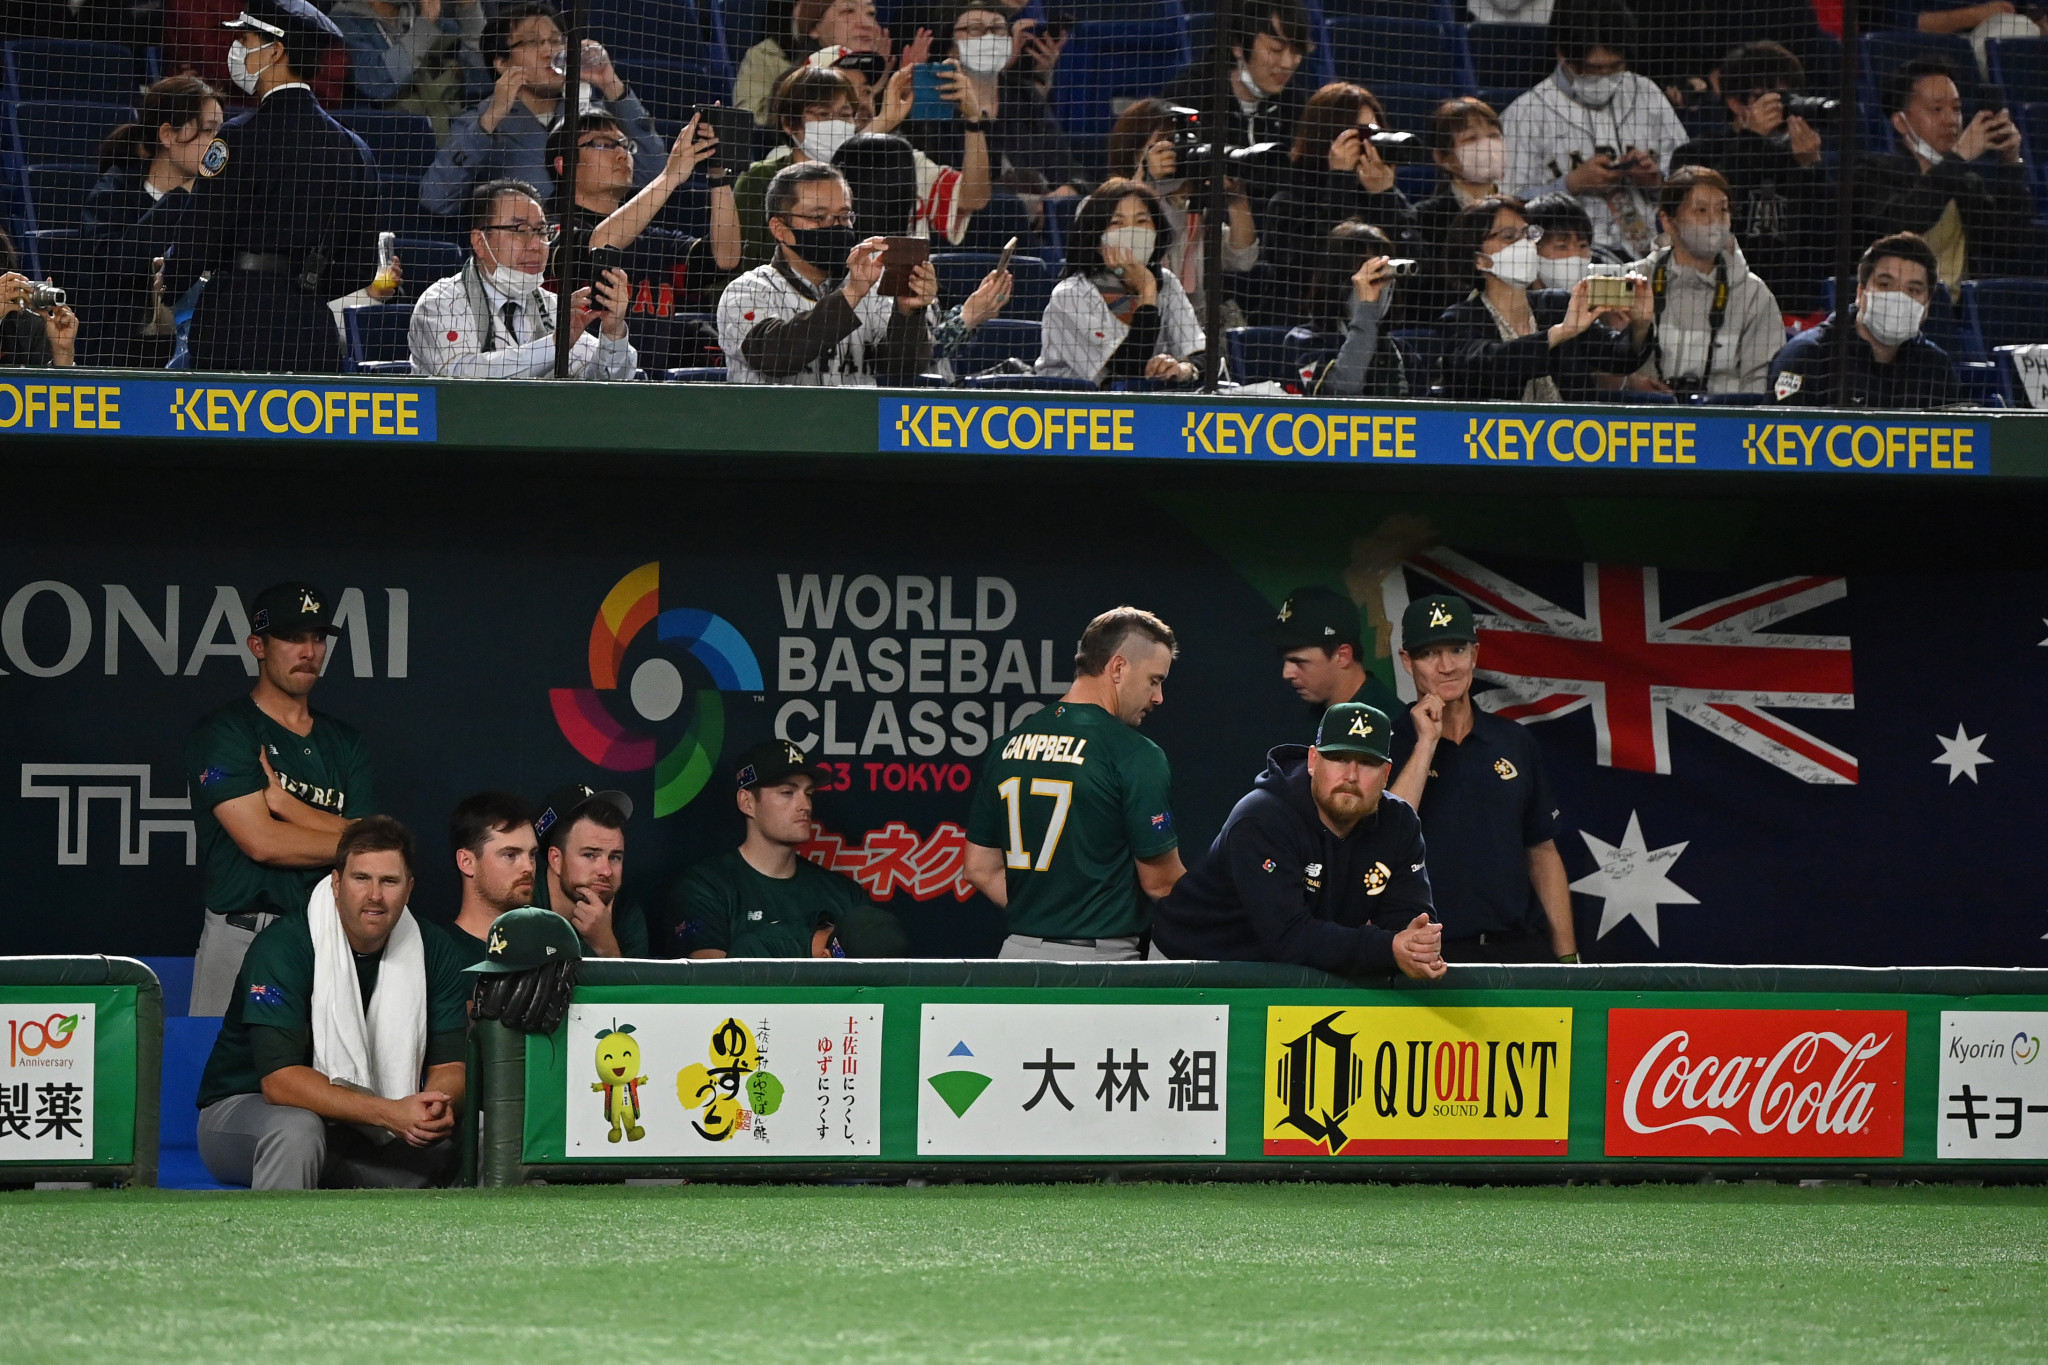 Team Mexico advances to World Baseball Classic quarterfinals with win over  Team Canada